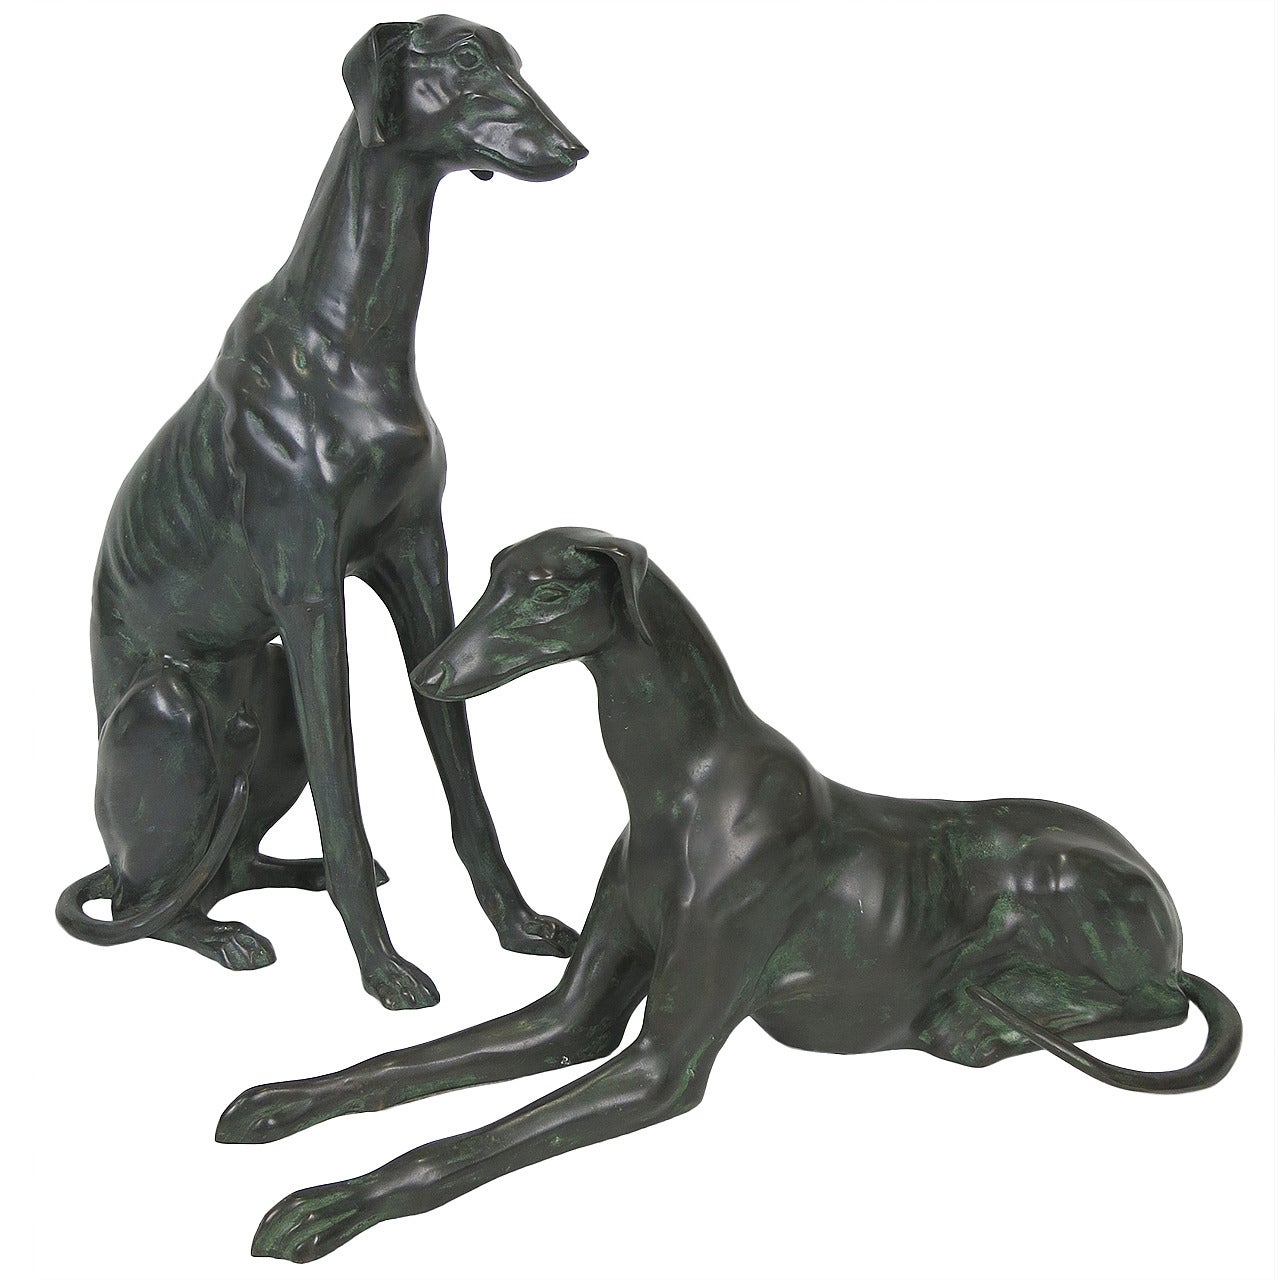 Pair of Life-Size Bronze Whippets